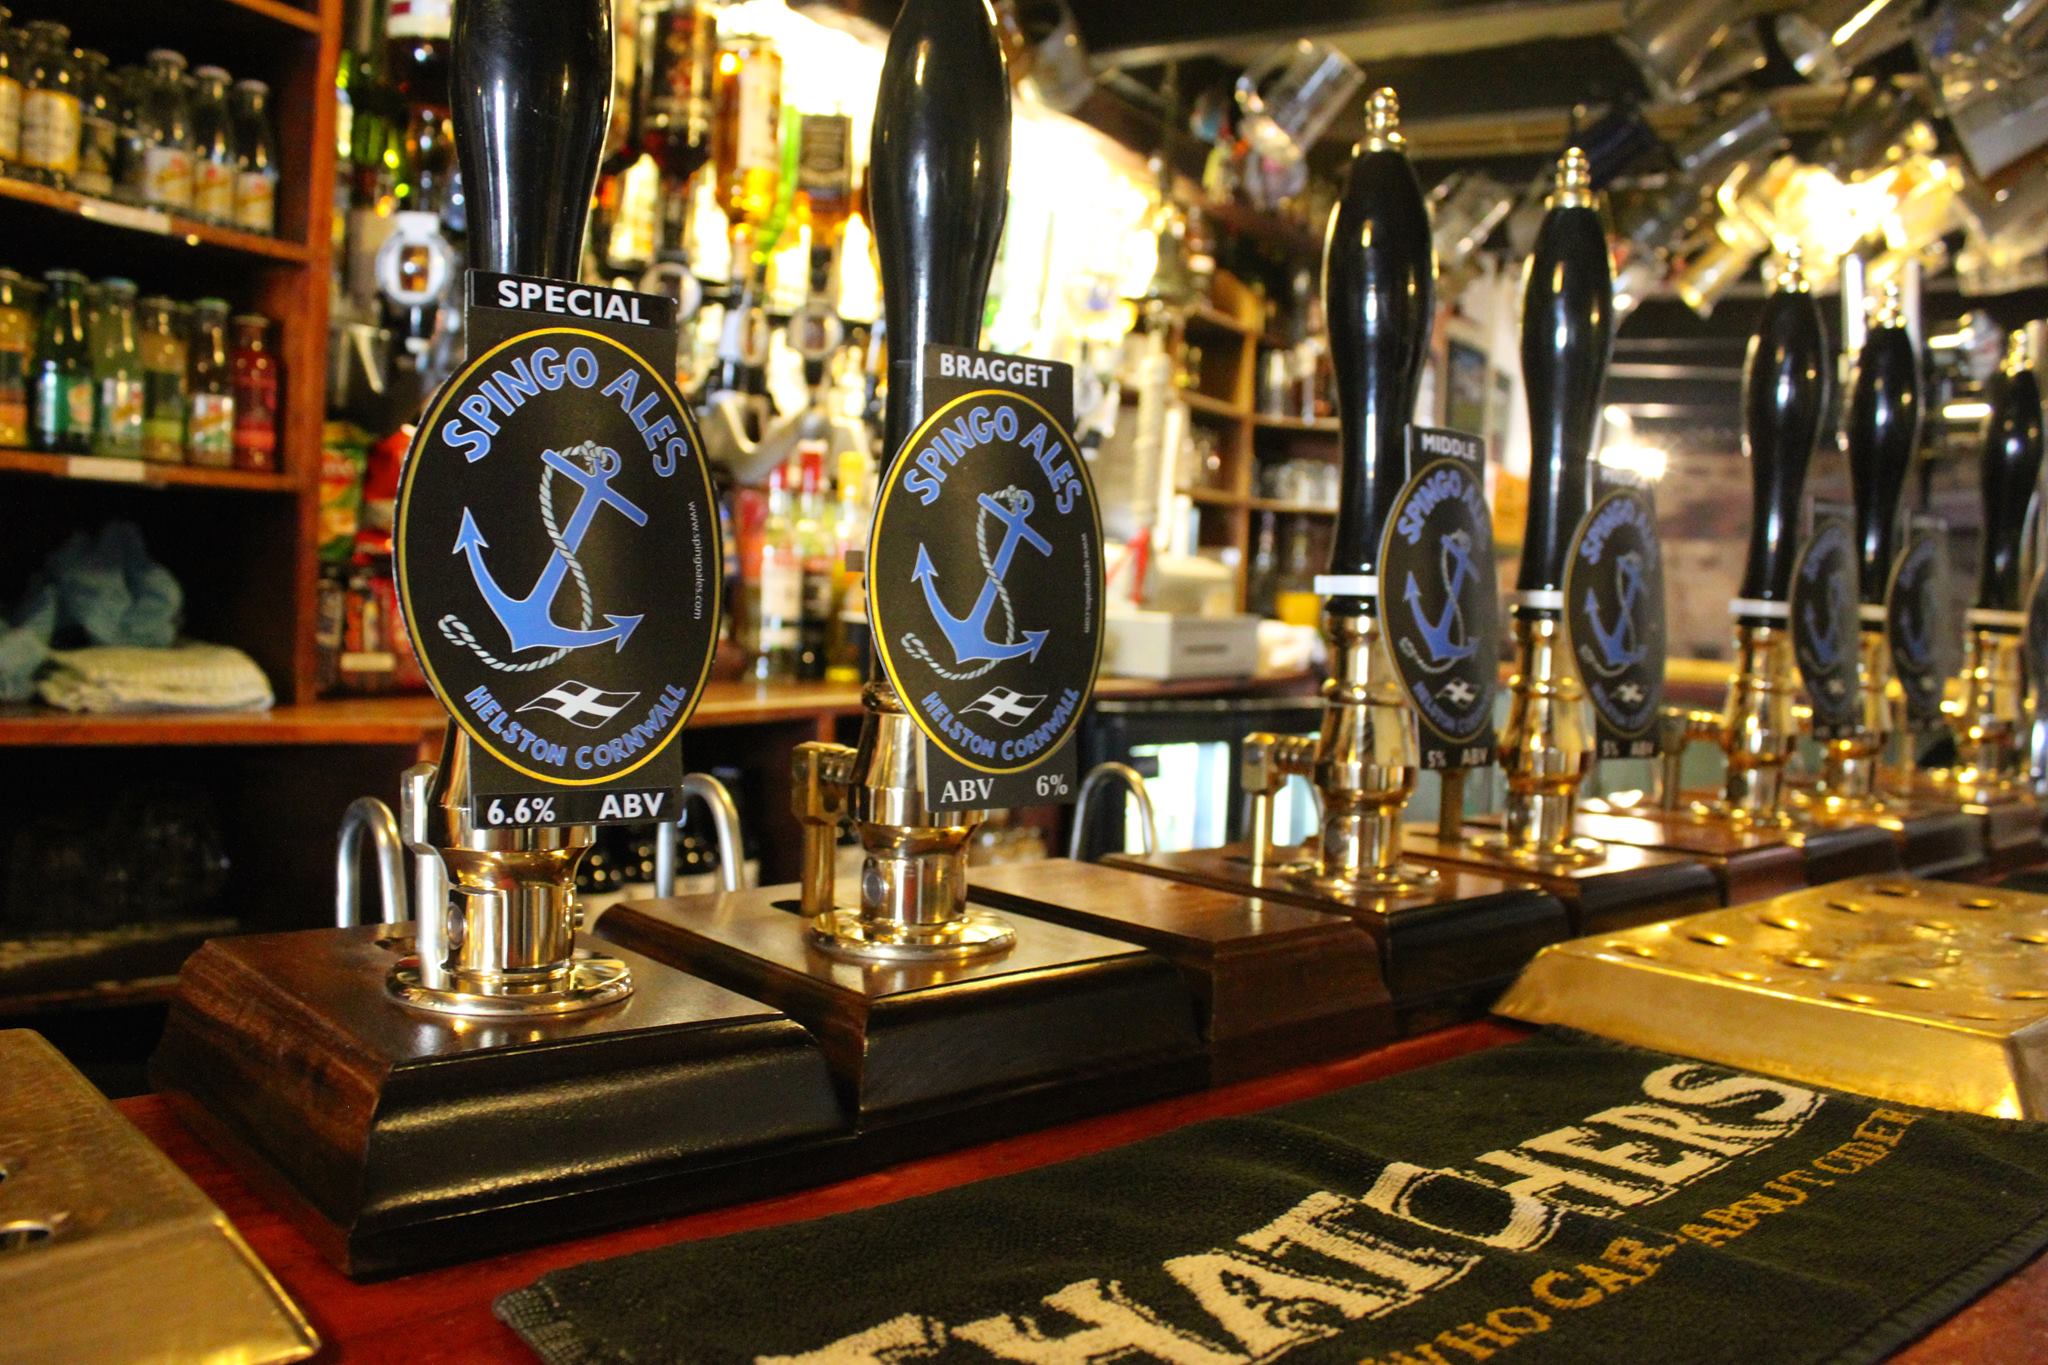 Spingo on tap at the bar in the Blue Anchor pub in Helston